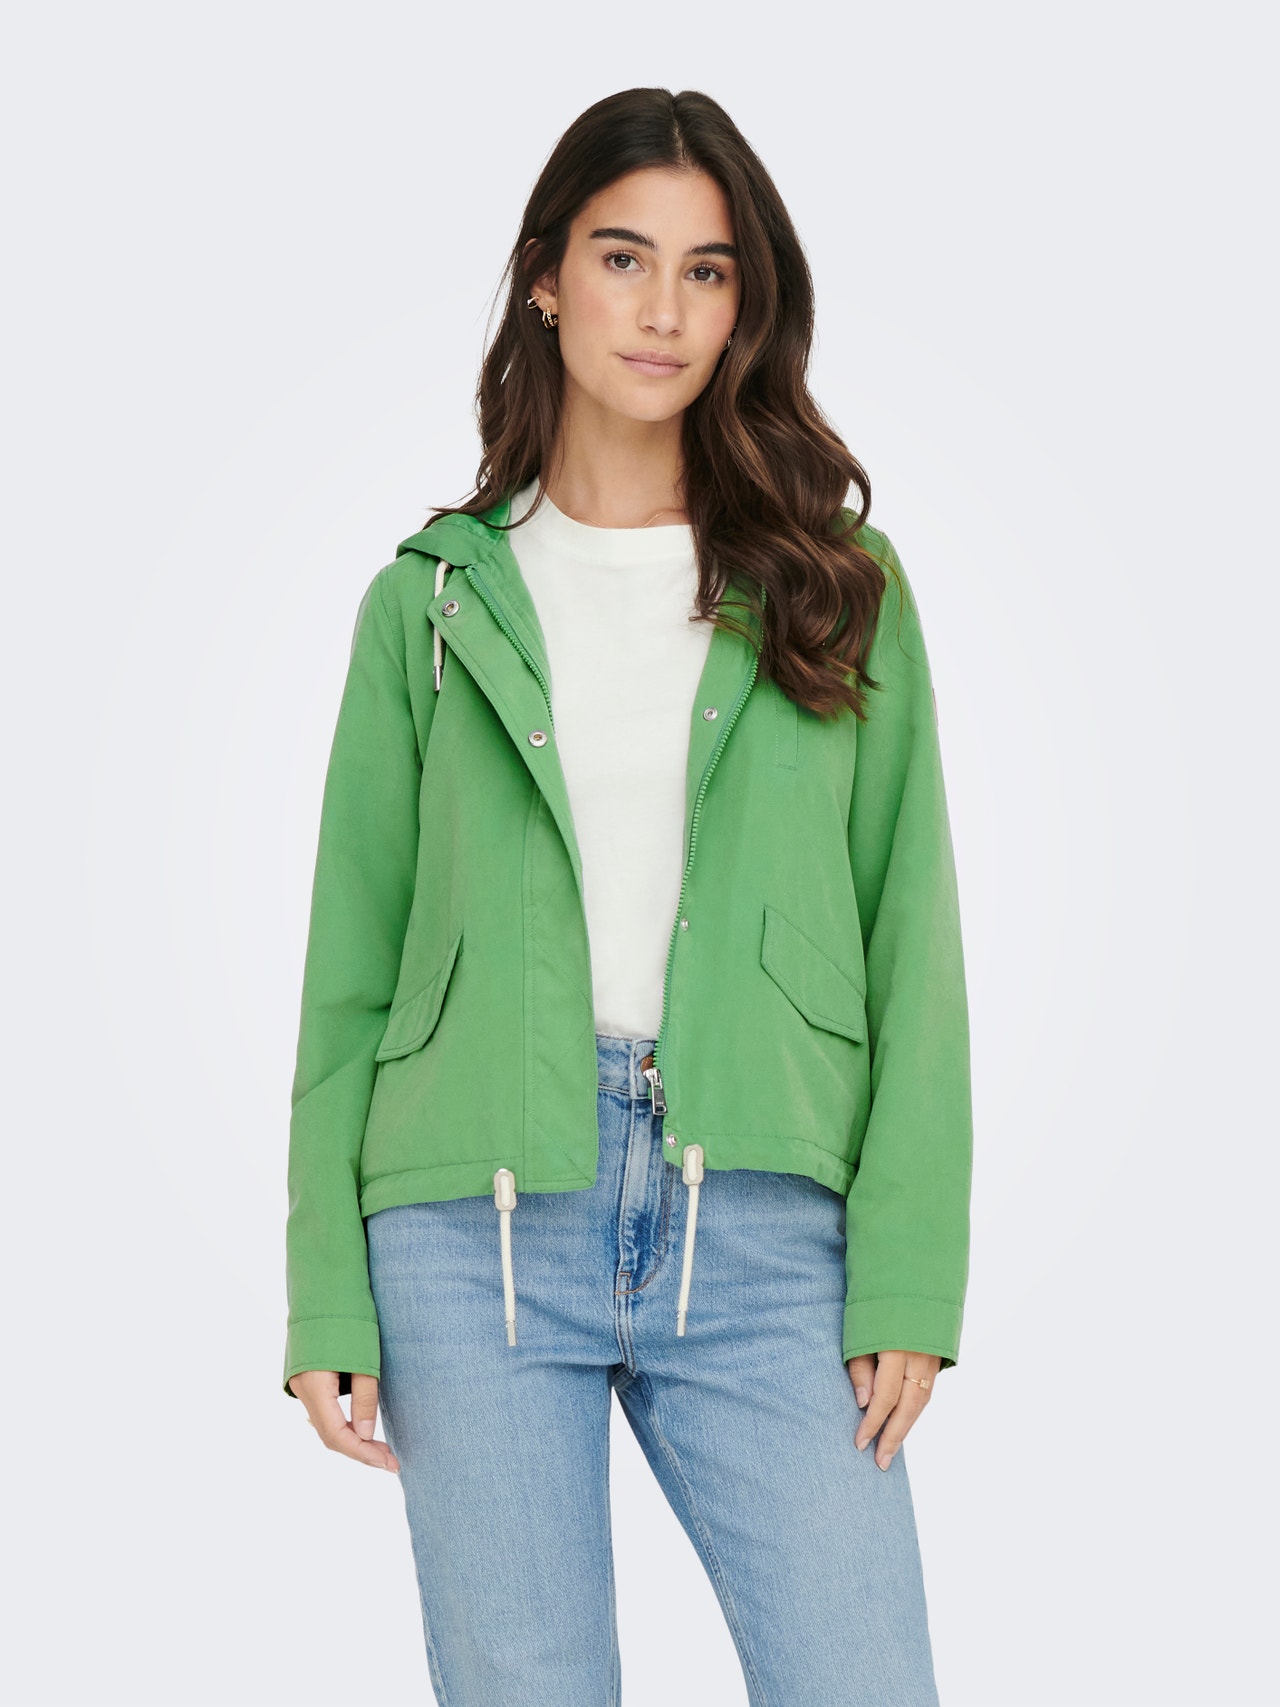 ONLY Vestes Capuche -Green Bee - 15218613